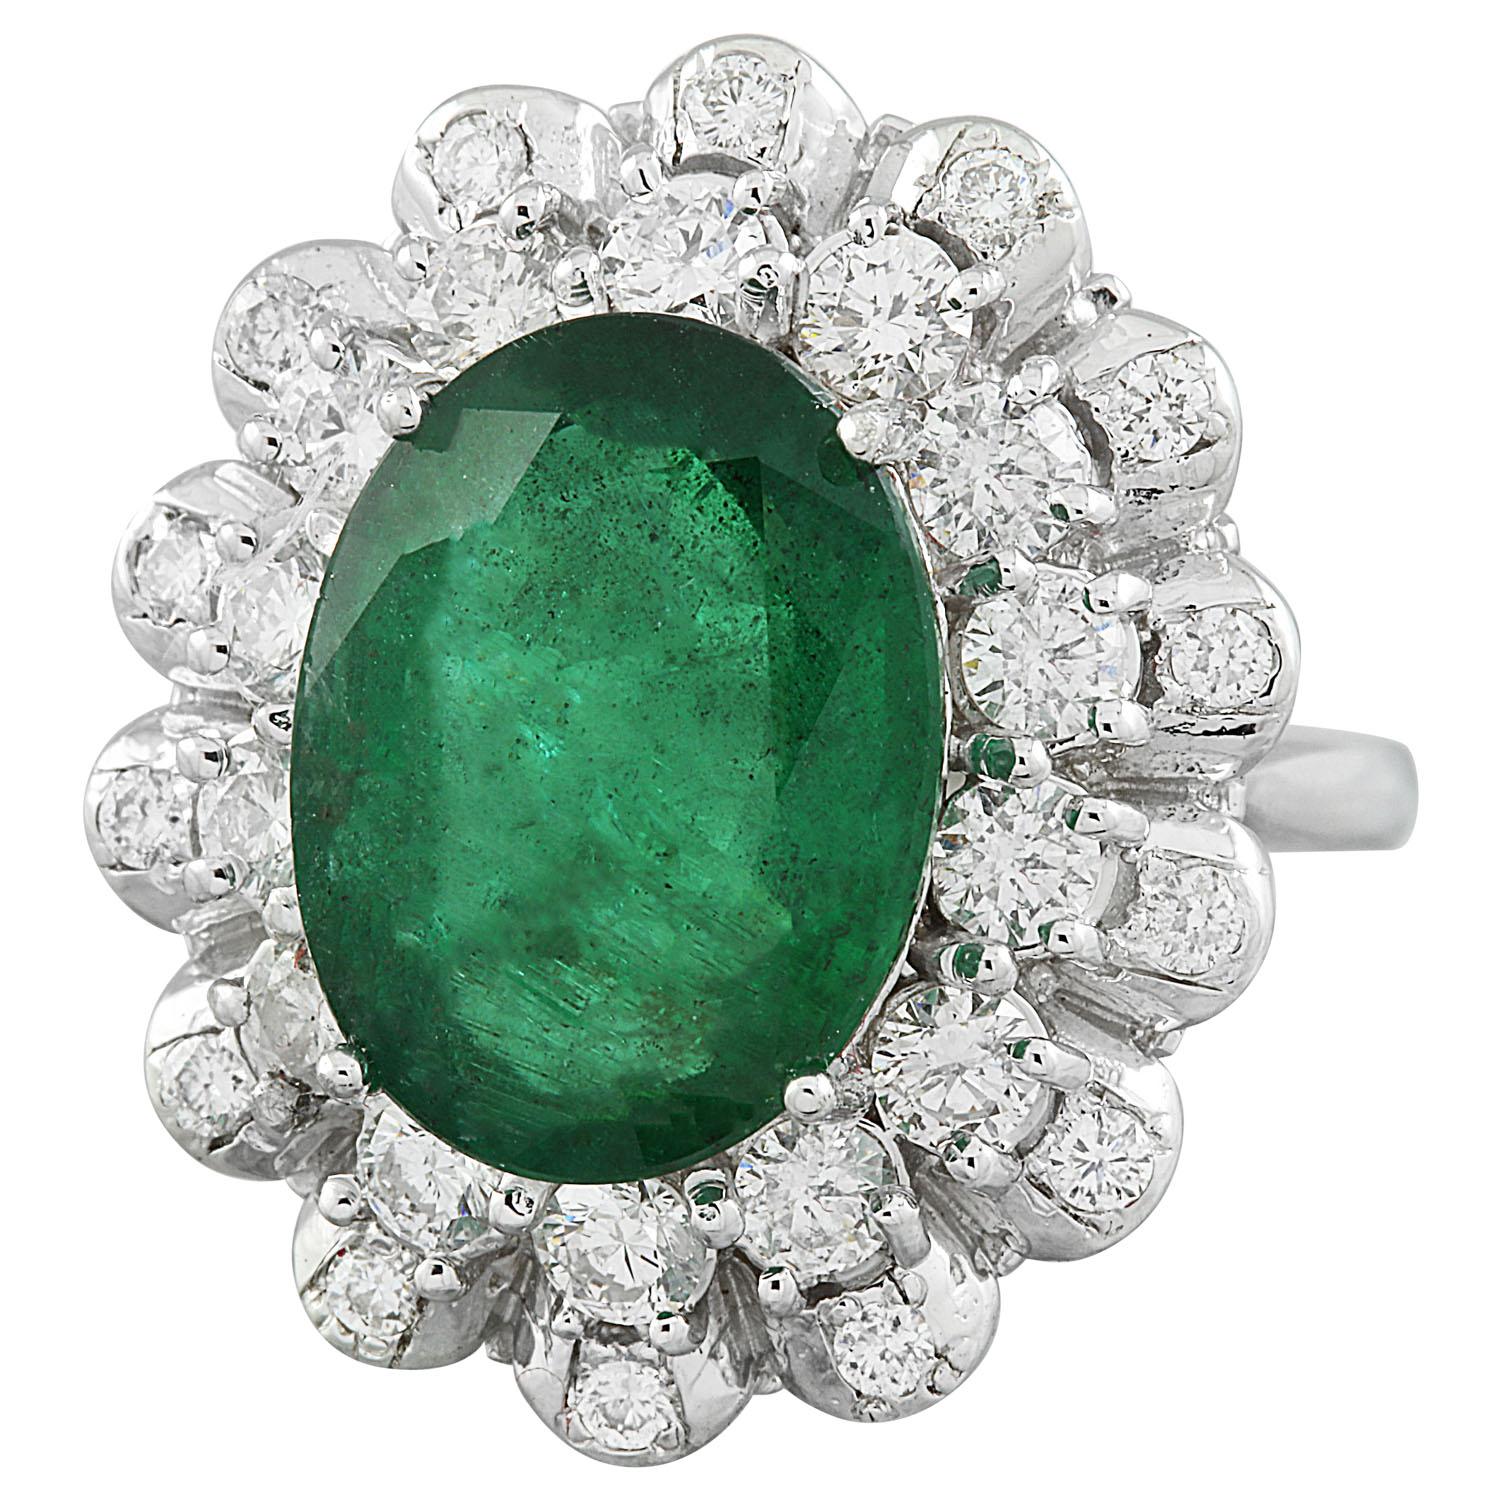 8.20 Carat Natural Emerald 14 Karat Solid White Gold Diamond Ring
Stamped: 14K 
Total Ring Weight: 7.9 Grams 
Emerald Weight 6.88 Carat (14.00x10.00 Millimeters)
Diamond Weight: 1.32 Carat (F-G Color, VS2-SI1 Clarity )
Face Measures: 23.40x19.75